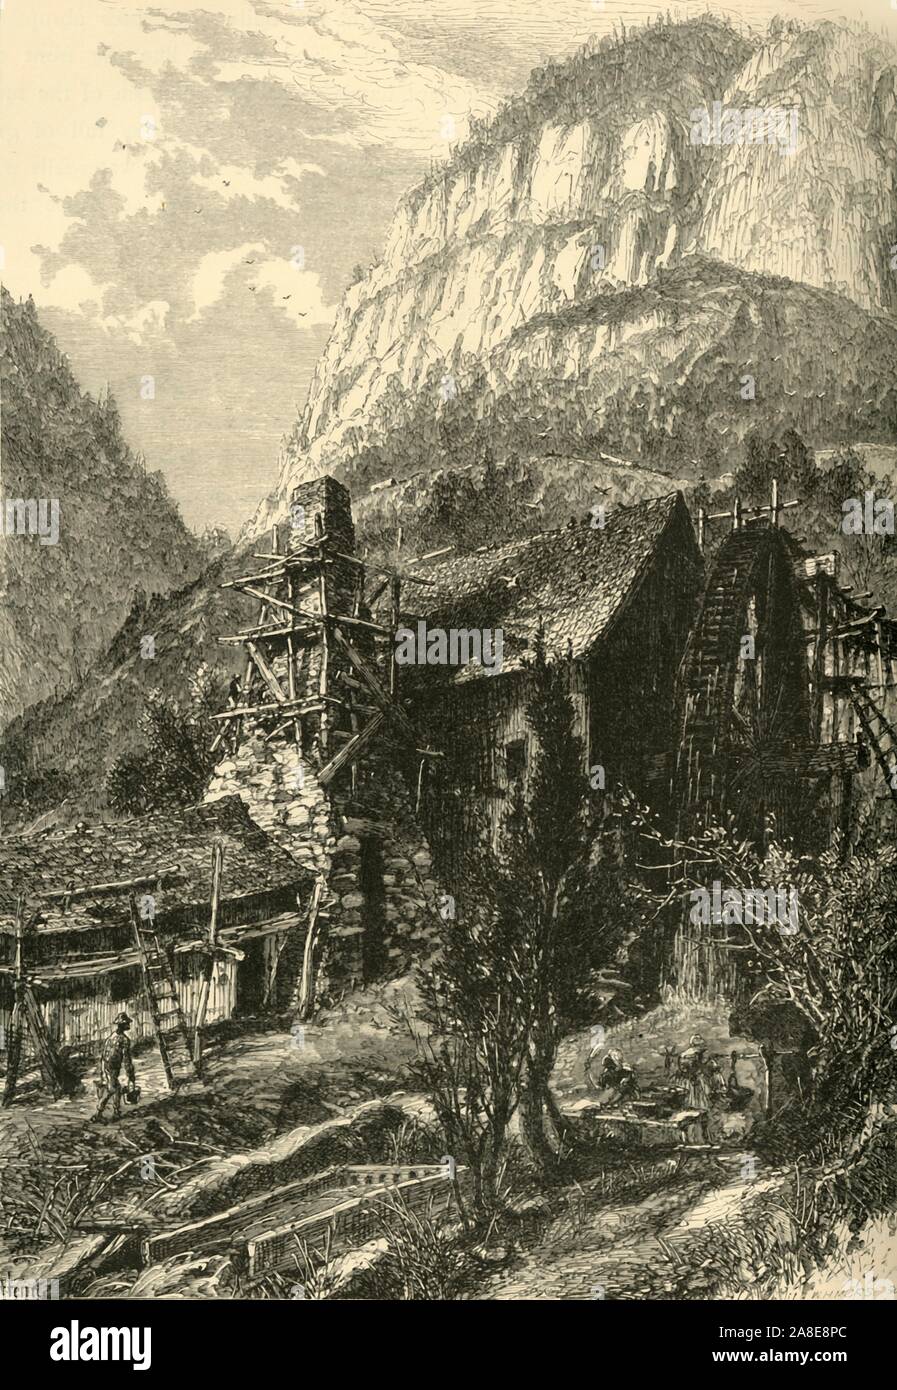 'Cumberland Gap, from the East', 1872. Watermill near the pass through the Cumberland Mountains on the border of Kentucky and Virginia, USA. The chimney is clad in timber scaffolding. Women are doing laundry in the foreground. From &quot;Picturesque America; or, The Land We Live In, A Delineation by Pen and Pencil of the Mountains, Rivers, Lakes...with Illustrations on Steel and Wood by Eminent American Artists&quot; Vol. I, edited by William Cullen Bryant. [D. Appleton and Company, New York, 1872] Stock Photo